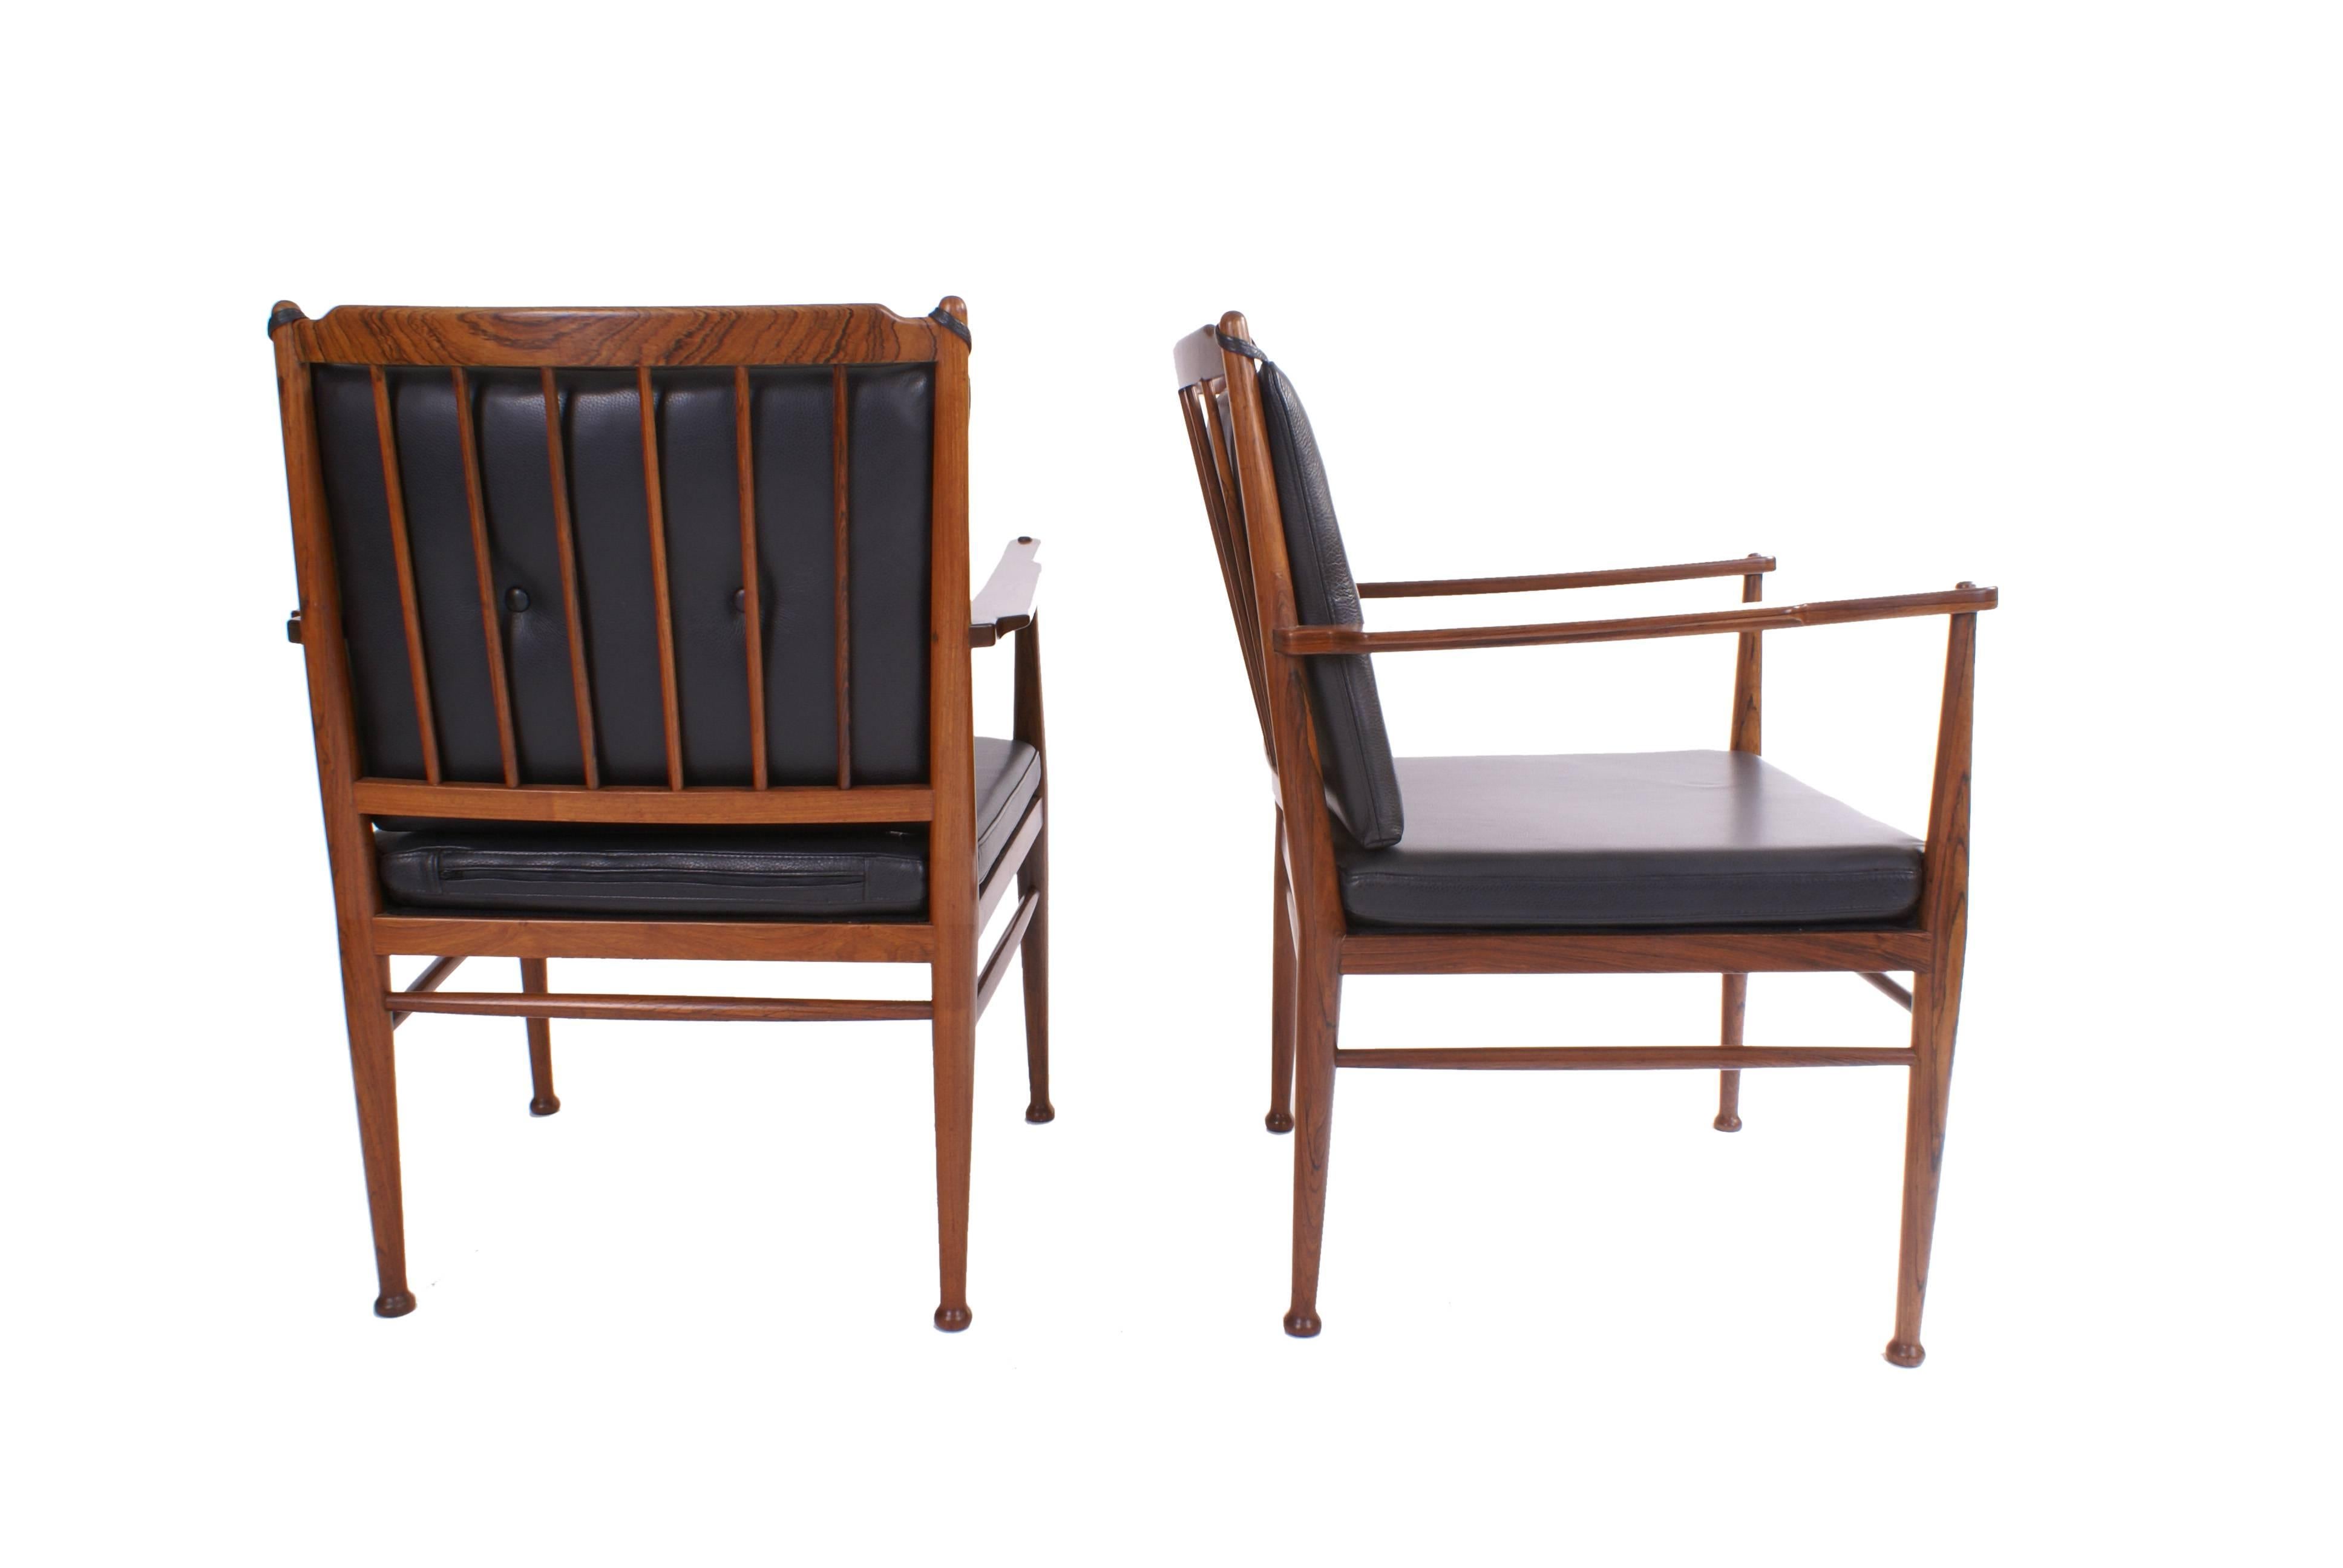 Peter Hvidt & Orla Mølgaard Nielsen pair of solid Brazilian rosewood armchairs, back with vertical slats. Loose cushions in seat and back upholstered with black leather, back cushion fitted with buttons.

These examples made 1950-1960's by master